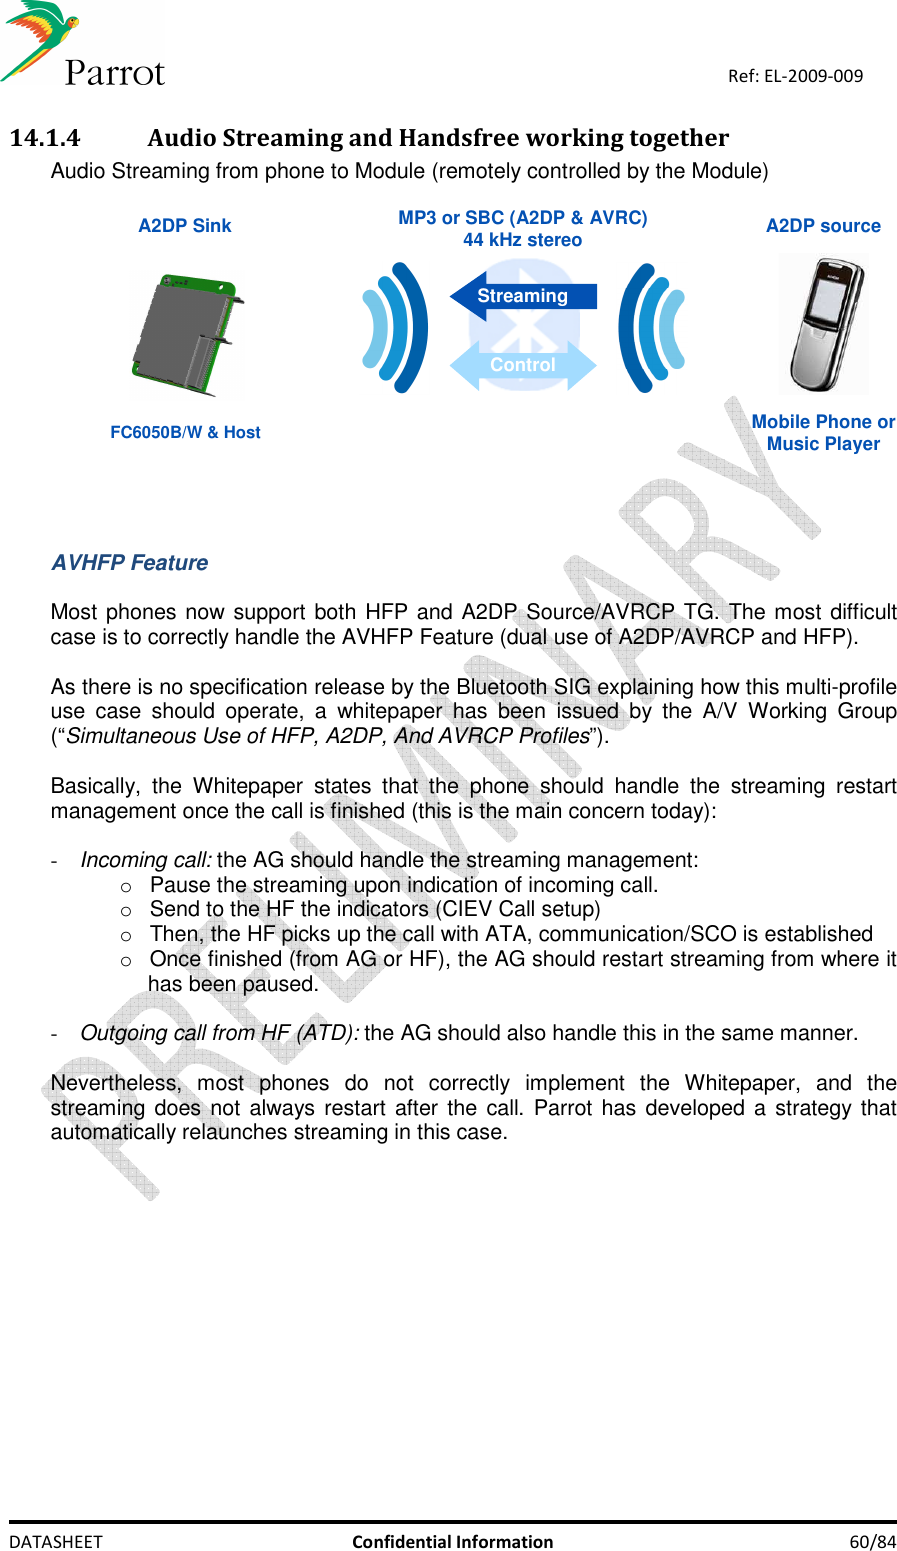    DATASHEET  Confidential Information  60/84 Ref: EL-2009-009 14.1.4 Audio Streaming and Handsfree working together Audio Streaming from phone to Module (remotely controlled by the Module)   A2DP source A2DP SinkMobile Phone orMusic Player MP3 or SBC (A2DP &amp; AVRC) 44 kHz stereo StreamingControl FC6050B/W &amp; Host    AVHFP Feature  Most phones now support both HFP and A2DP Source/AVRCP TG. The most difficult case is to correctly handle the AVHFP Feature (dual use of A2DP/AVRCP and HFP).   As there is no specification release by the Bluetooth SIG explaining how this multi-profile use  case  should  operate,  a  whitepaper  has  been  issued  by  the  A/V  Working  Group (“Simultaneous Use of HFP, A2DP, And AVRCP Profiles”).  Basically,  the  Whitepaper  states  that  the  phone  should  handle  the  streaming  restart management once the call is finished (this is the main concern today):  - Incoming call: the AG should handle the streaming management: o  Pause the streaming upon indication of incoming call. o  Send to the HF the indicators (CIEV Call setup) o  Then, the HF picks up the call with ATA, communication/SCO is established o  Once finished (from AG or HF), the AG should restart streaming from where it has been paused.  - Outgoing call from HF (ATD): the AG should also handle this in the same manner.  Nevertheless,  most  phones  do  not  correctly  implement  the  Whitepaper,  and  the streaming does not always restart  after the call.  Parrot has developed a  strategy  that automatically relaunches streaming in this case.  